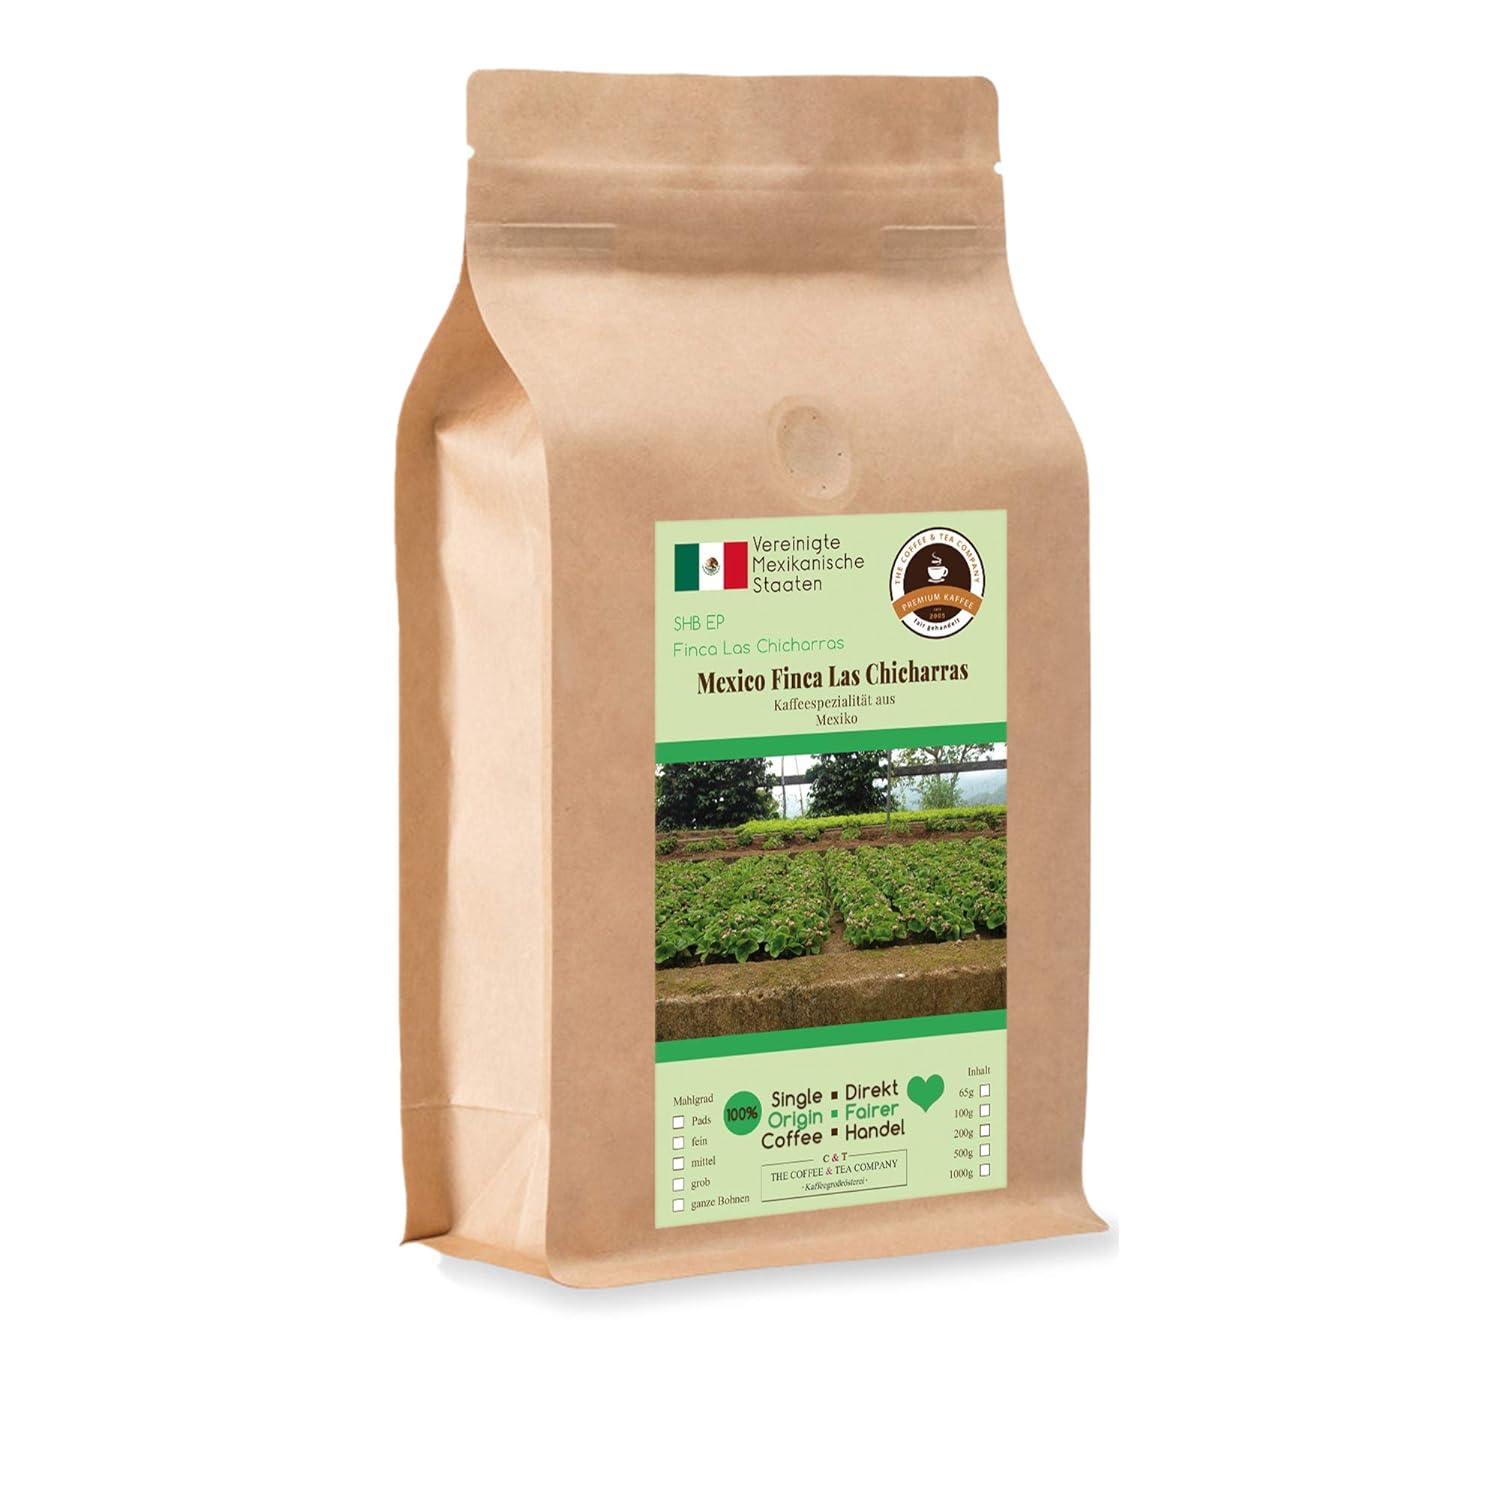 Coffee Globetrotter - Coffee with Heart - Mexico Finca Las Chicarras - 500 g Whole Bean - for Fully Automatic Coffee - Top Coffee Fair Trade Supports Social Projects